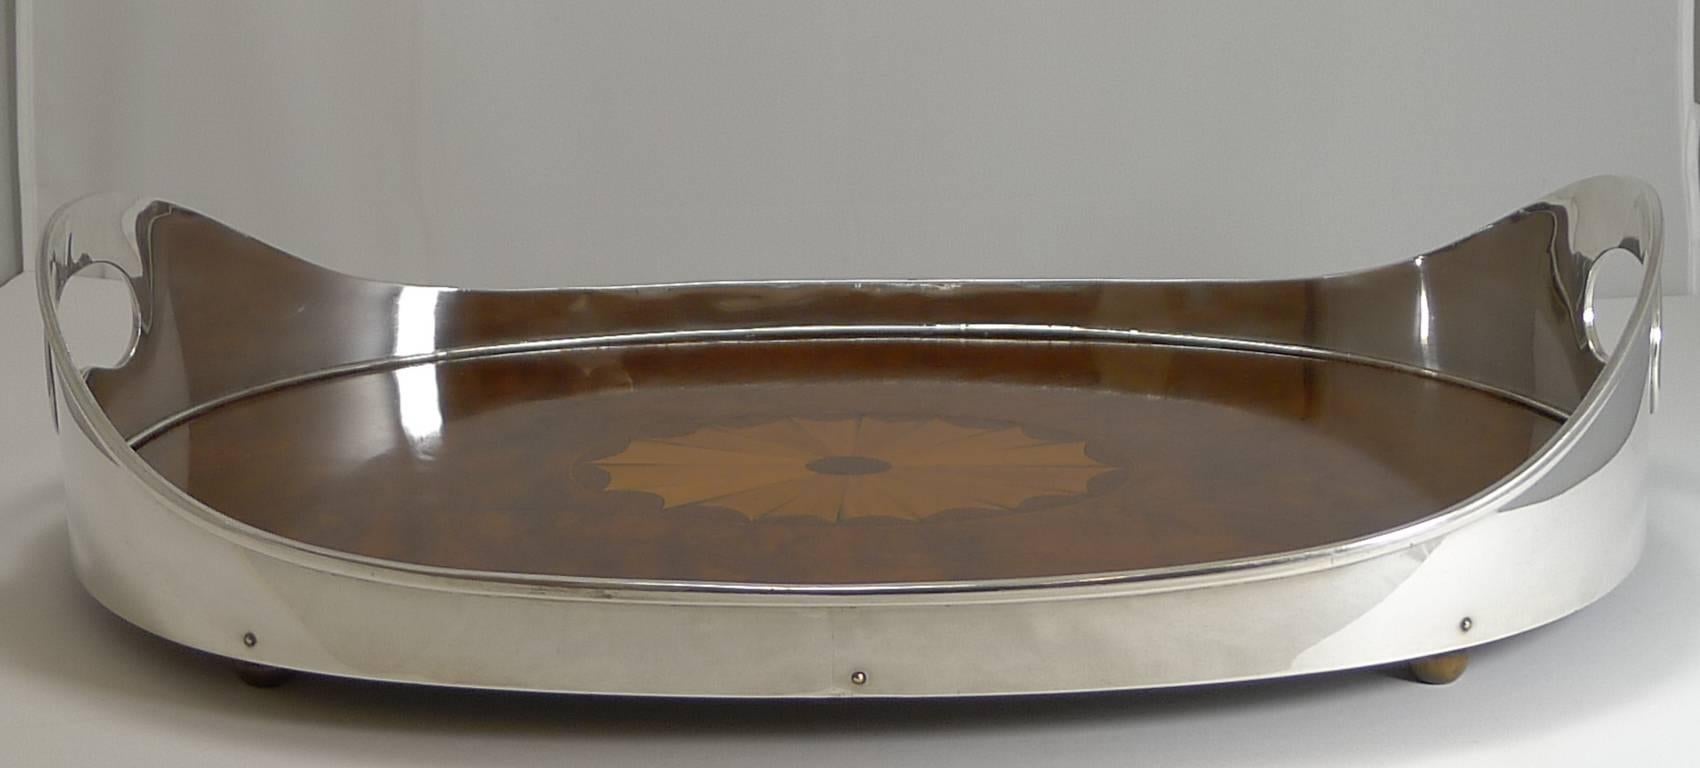 Late 19th Century Grand Inlaid Tray with Fabulous Silver Plated Gallery, circa 1900